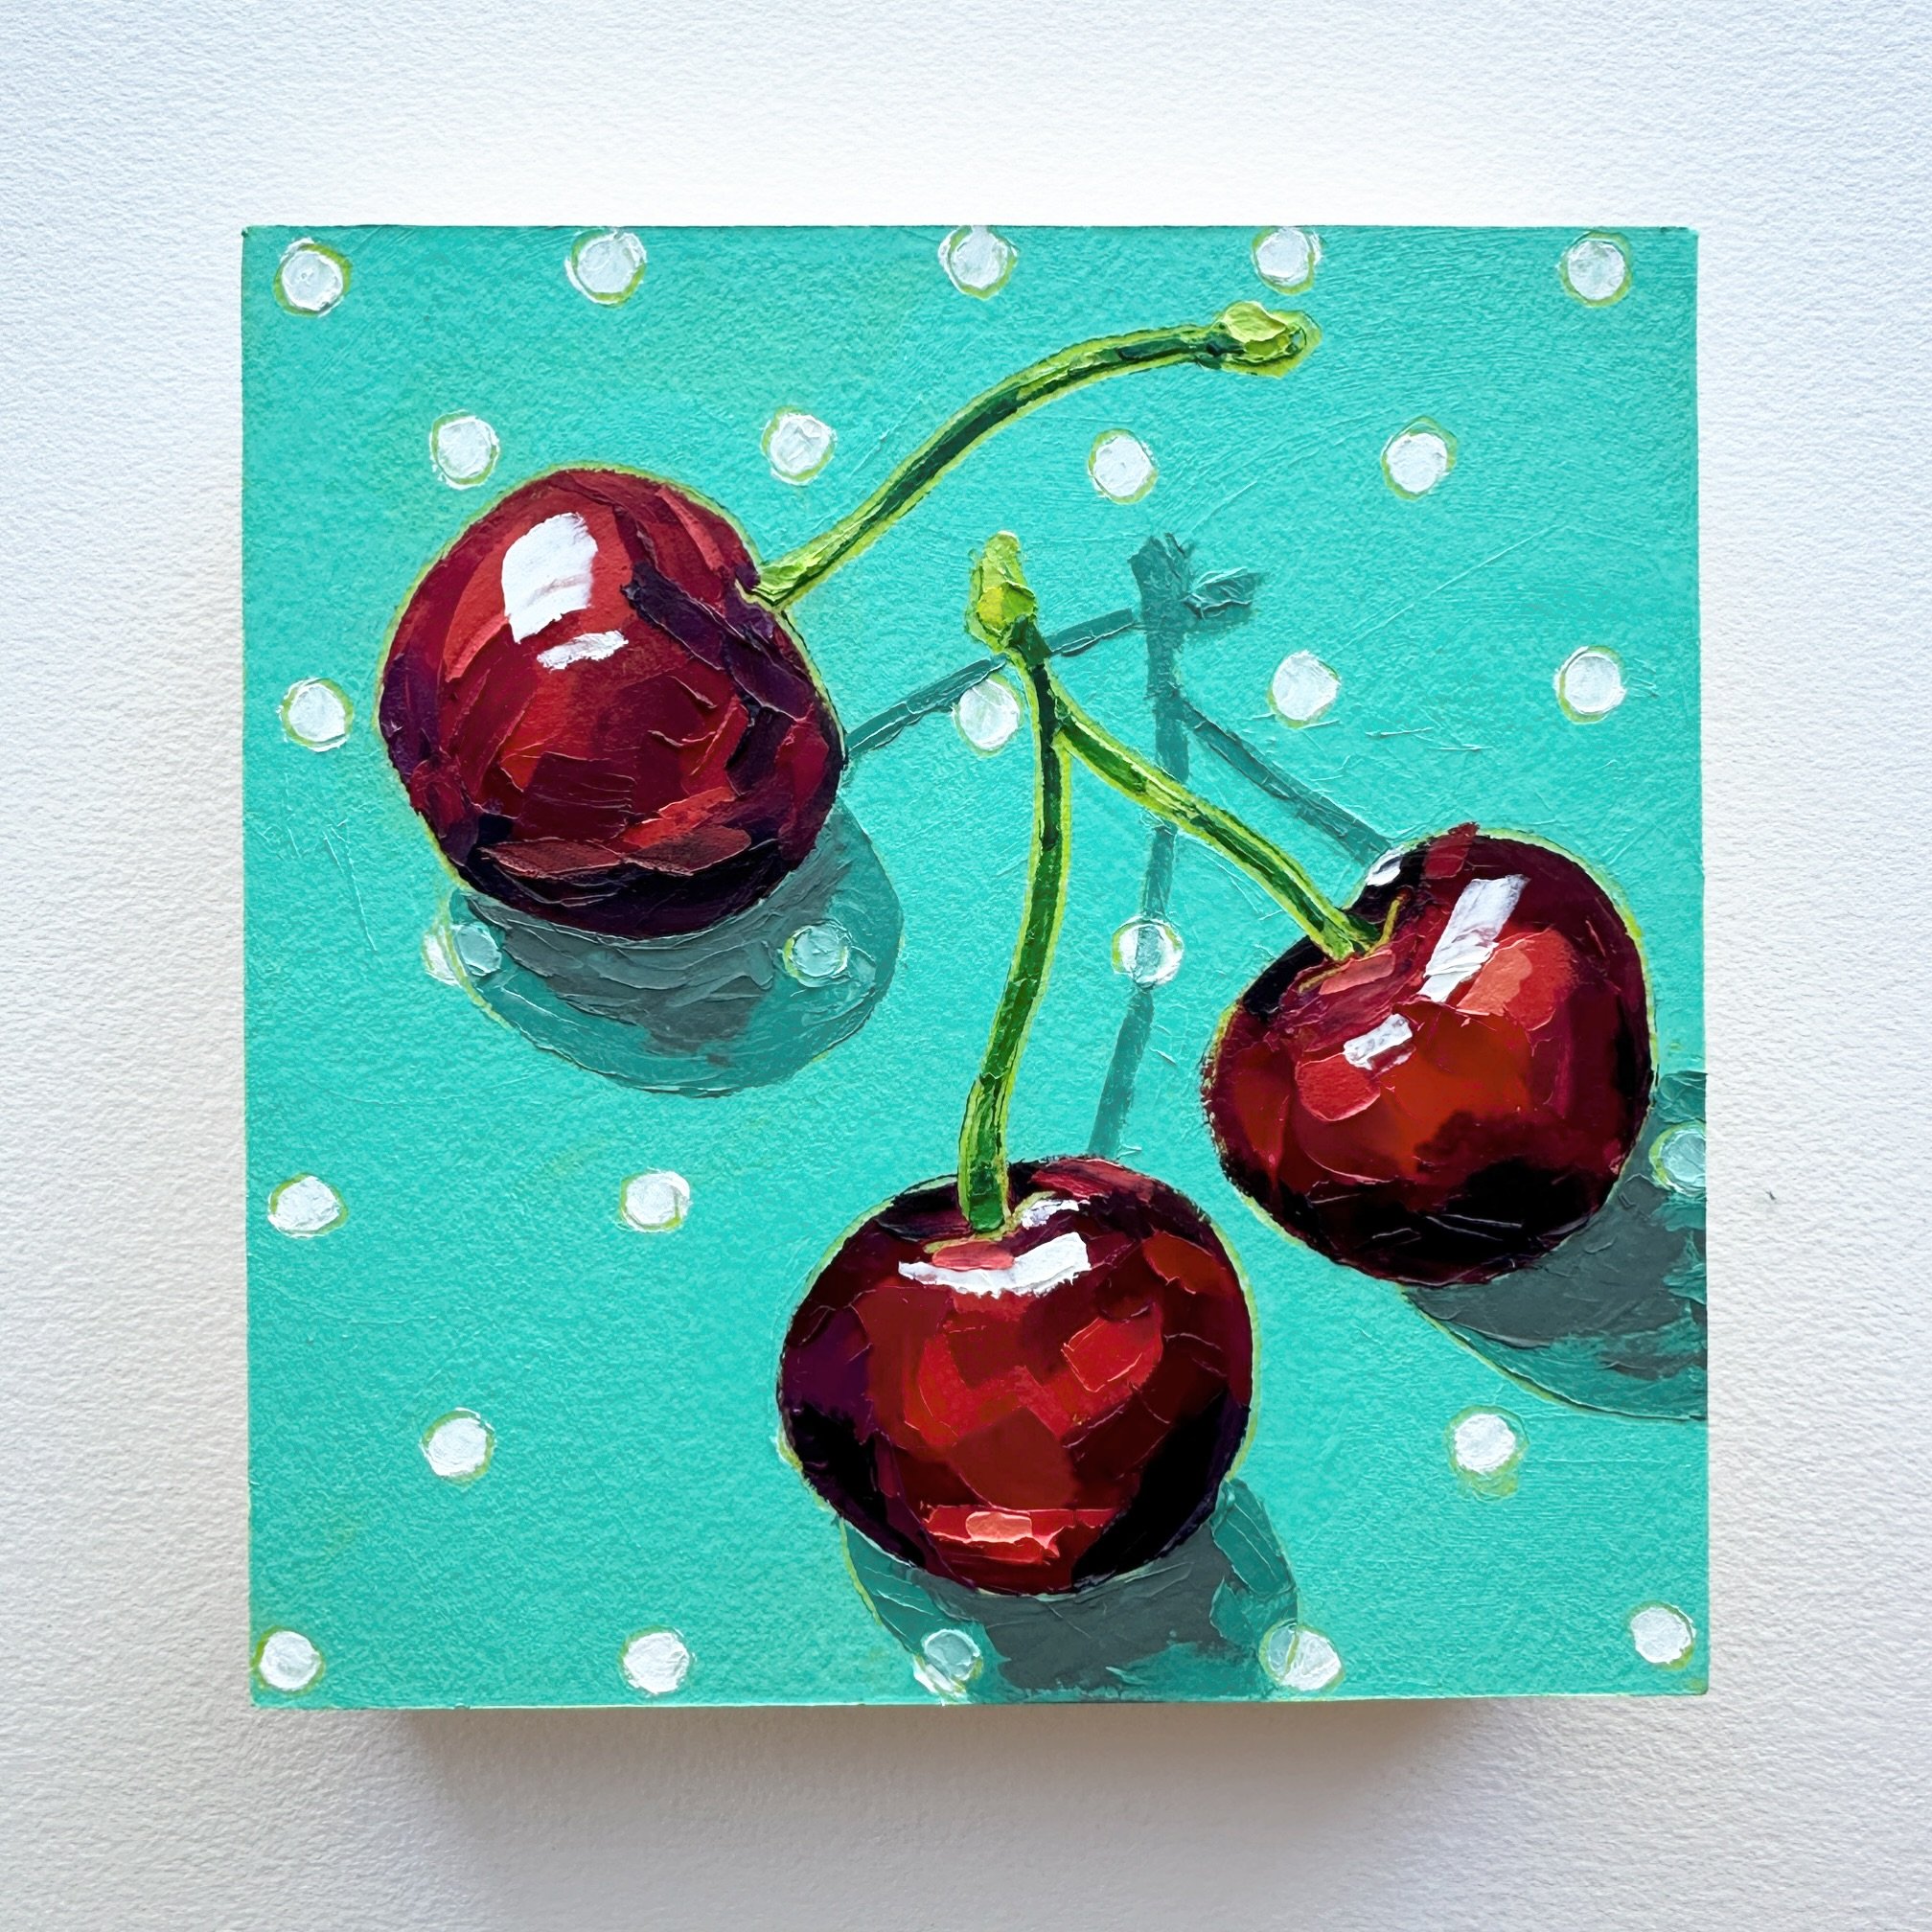 Day 52, The 100 Day Project 2024 @dothe100dayproject

Cherries! 

For days 51-60 of my 100 Day Project, I&rsquo;ll be painting fruits. They will all be 6&rdquo;x6&rdquo; on Arches oil paper mounted to 1.5&rdquo; deep panels, painted with my favorite 